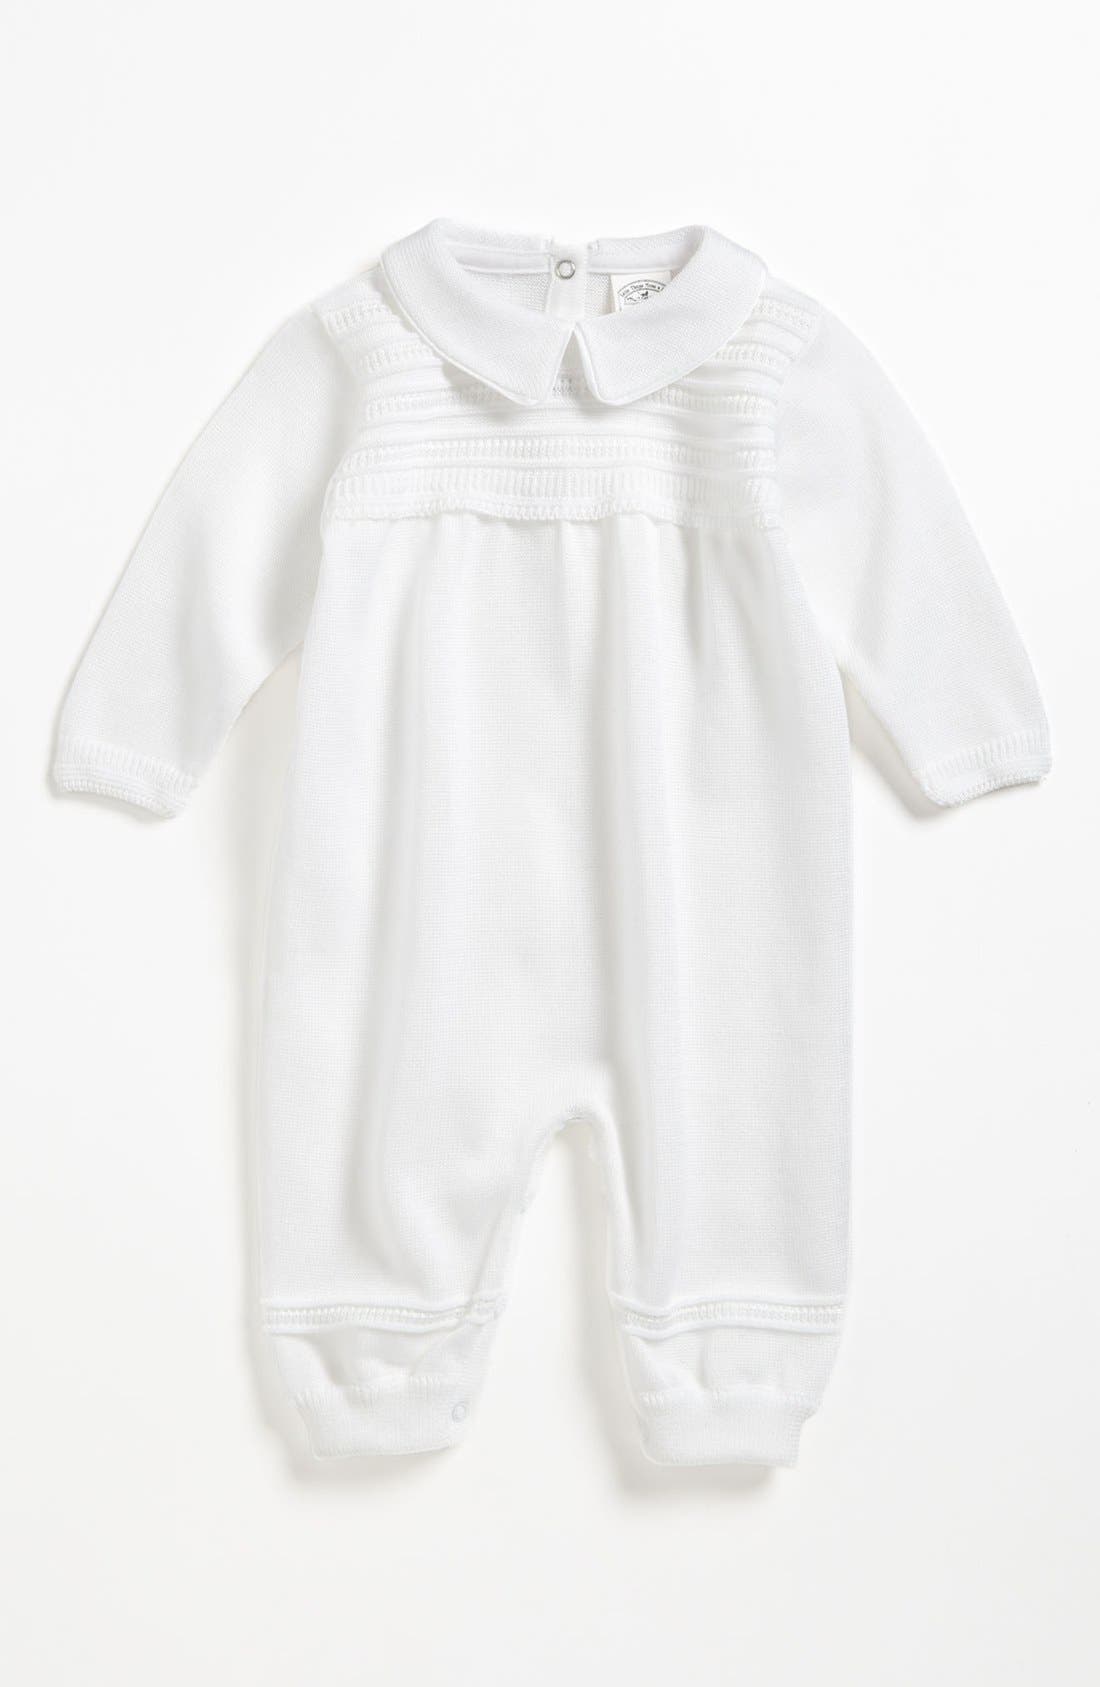 nordstrom baptism outfit